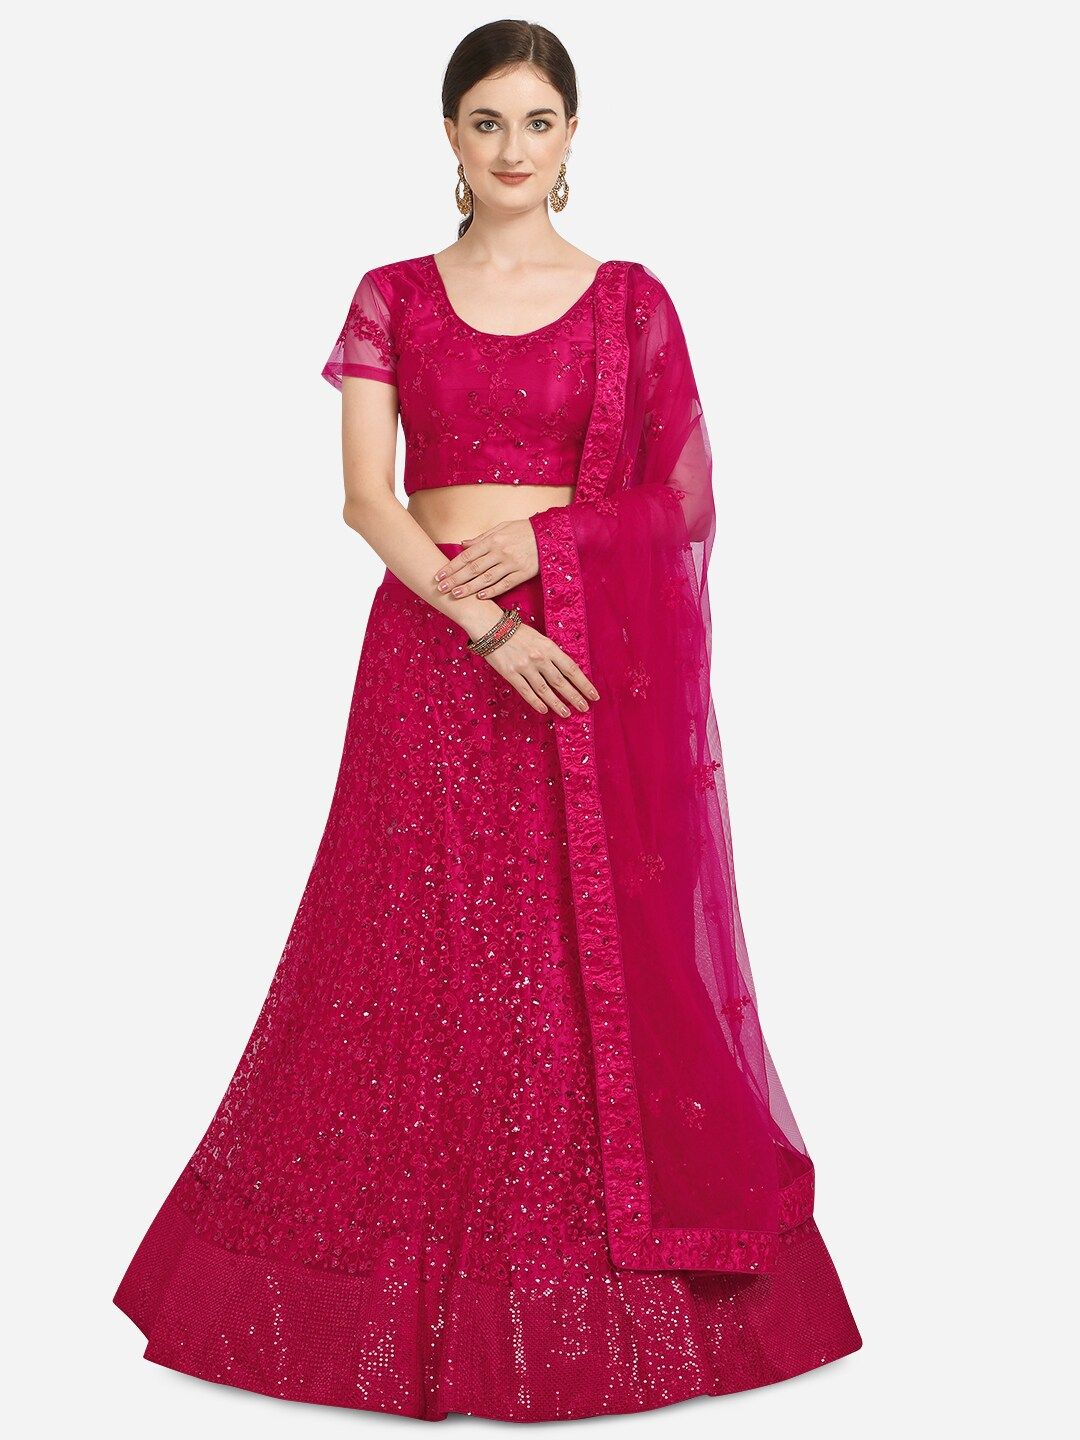 Netram Pink Embroidered Semi-Stitched Lehenga & Blouse with Dupatta Price in India